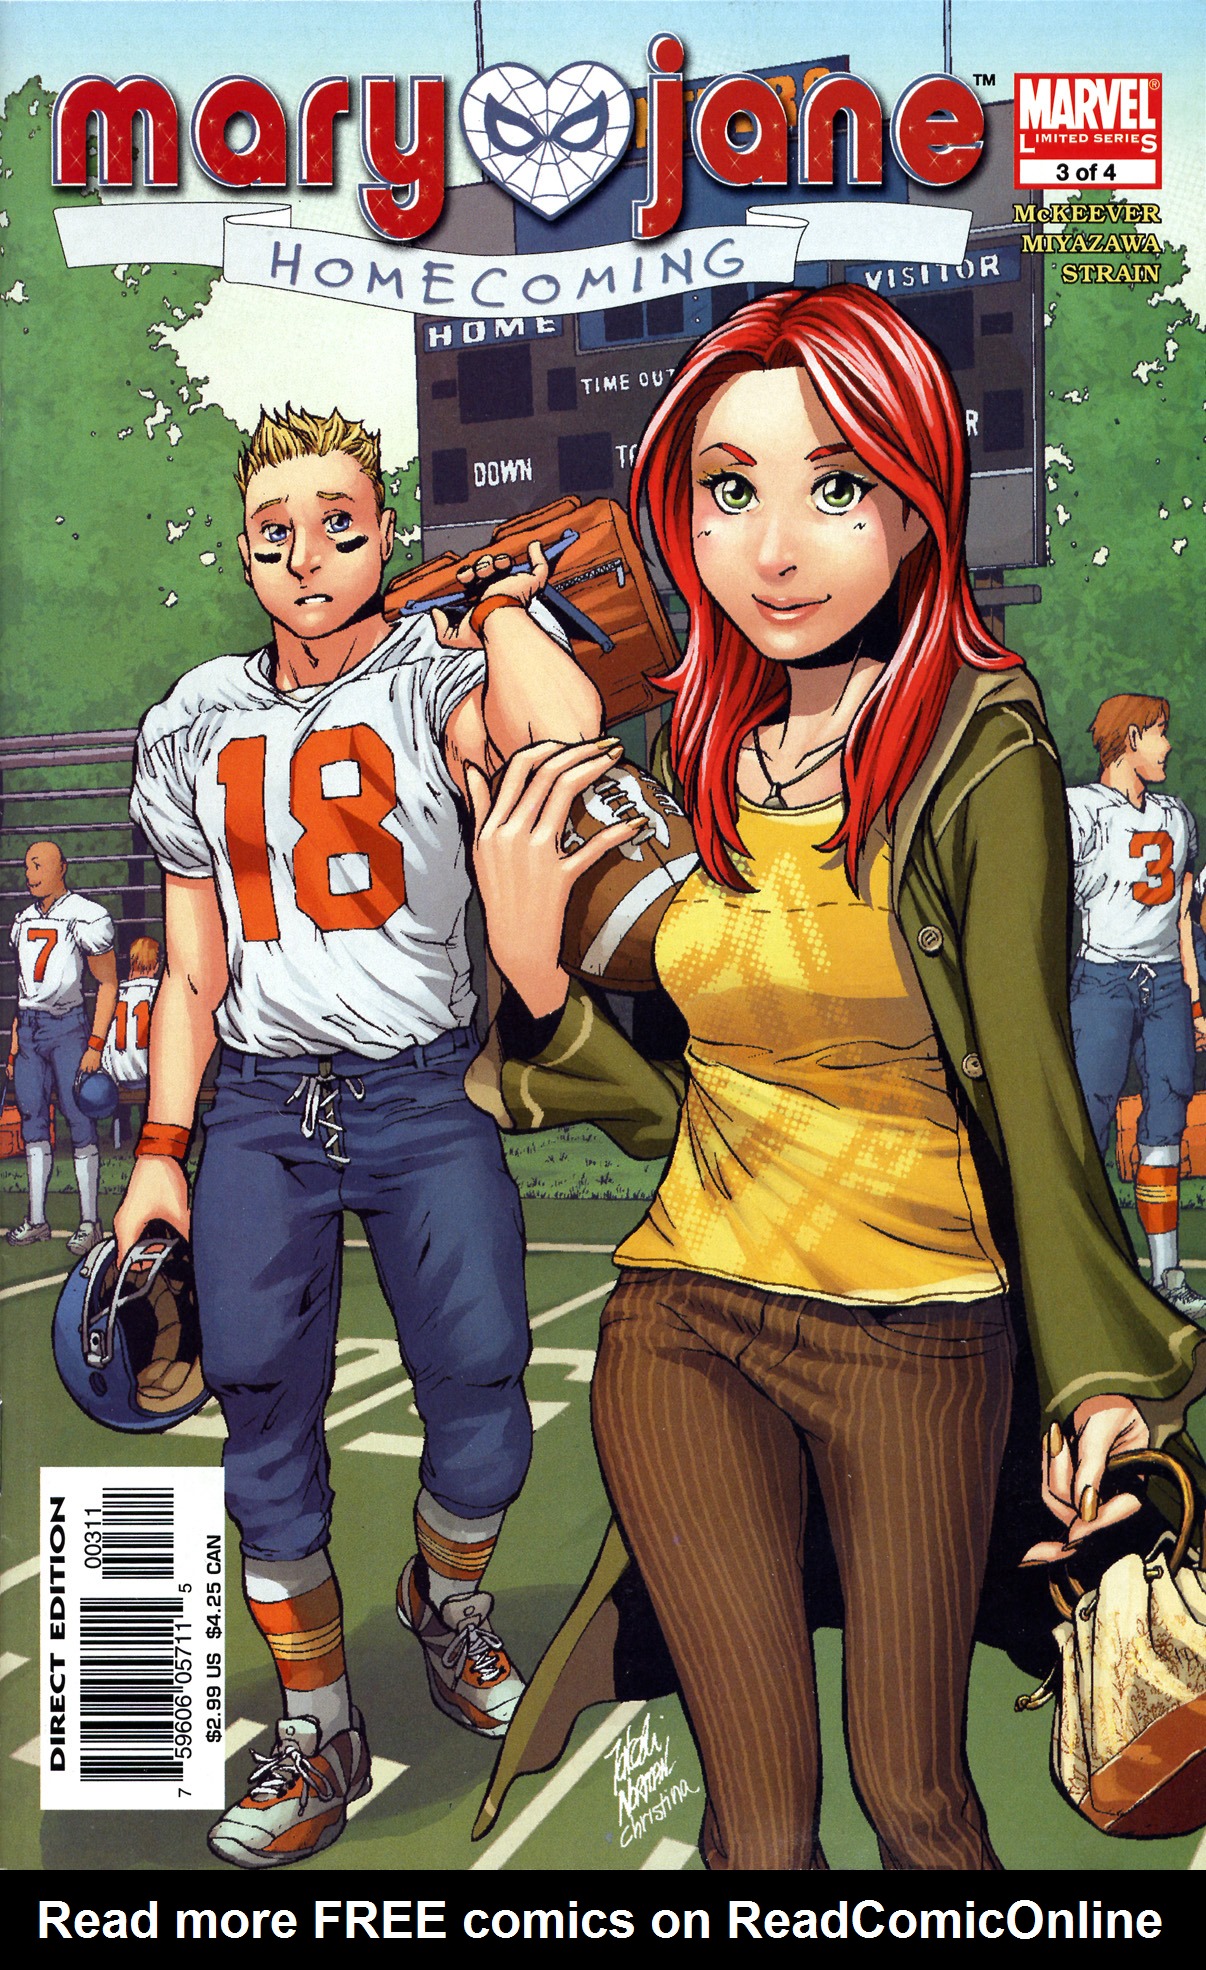 Read online Mary Jane: Homecoming comic -  Issue #3 - 1